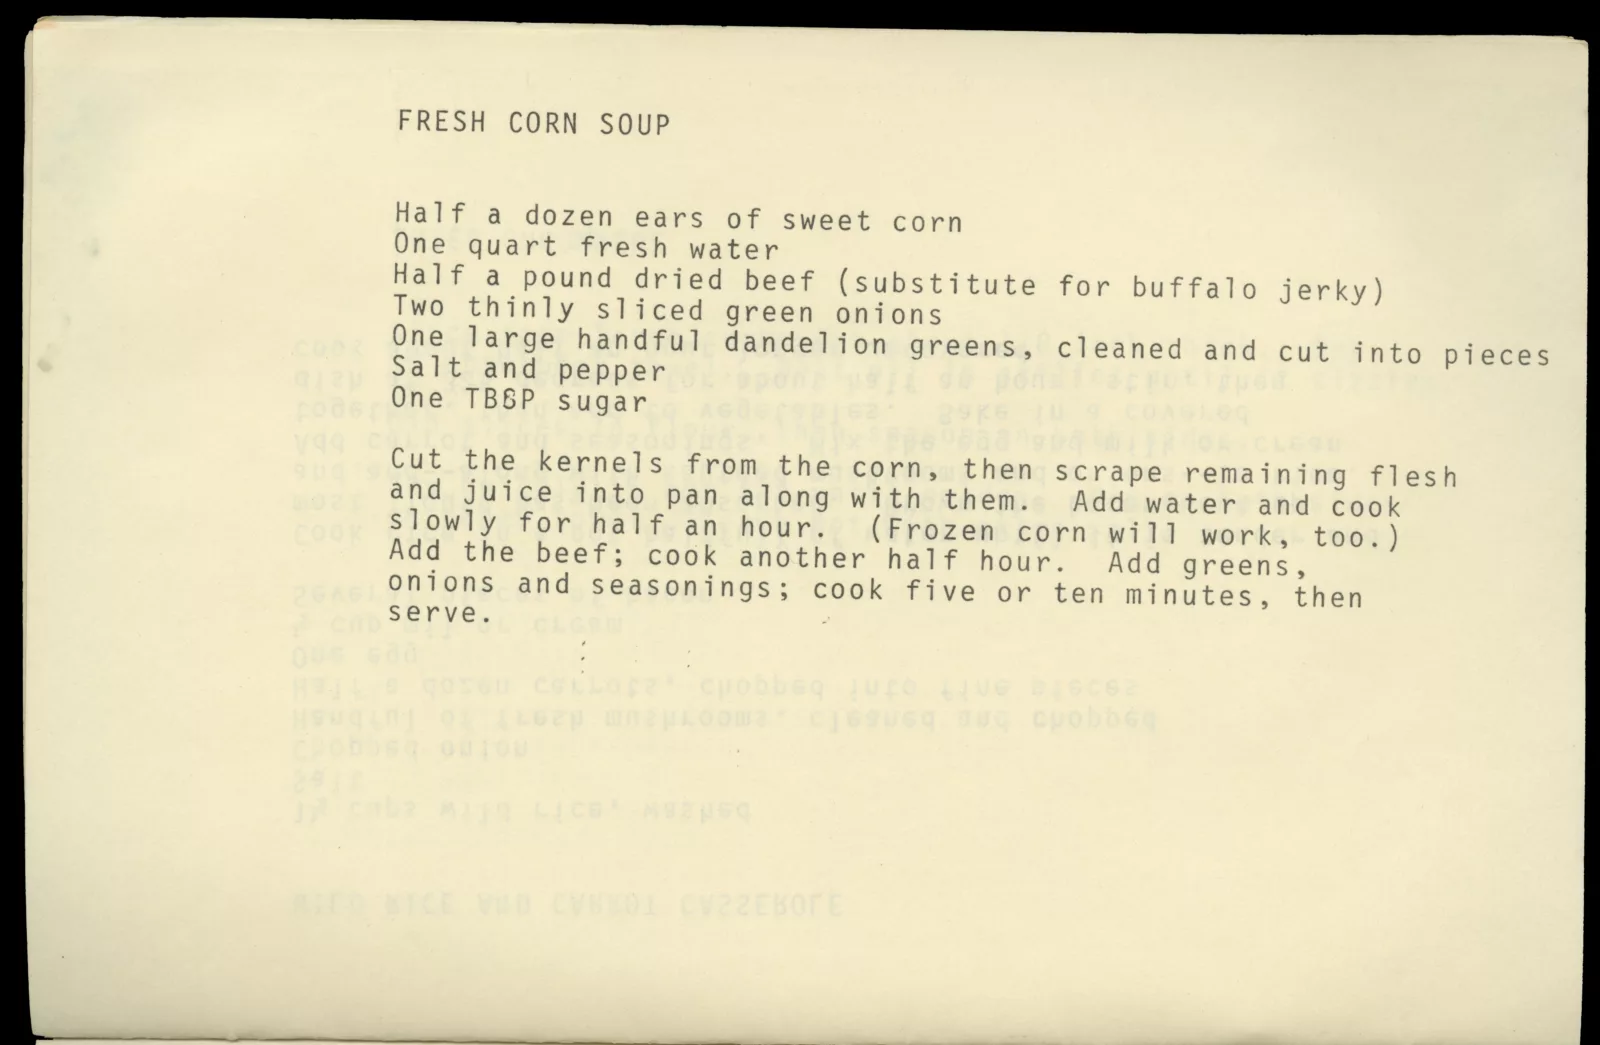 Typed page with recipe for Fresh Corn Soup. The recipe is as follows: "Half a dozen ears of sweet corn, one quart fresh water, half a pound dried beef (substitute for buffalo jerky), two thinly sliced green onions, one large handful dandelion greens (cleaned and cut into pieces), salt and pepper, one tbsp sugar. Cut the kernels from the corn, then scrape remaining flesh and juice into pan along with them. Add water and cook slowly for half and hour. (Frozen corn will work, too). Add the beef; cook another half hour. Add the greens, onions, and seasonings; cook five or ten minutes then serve.